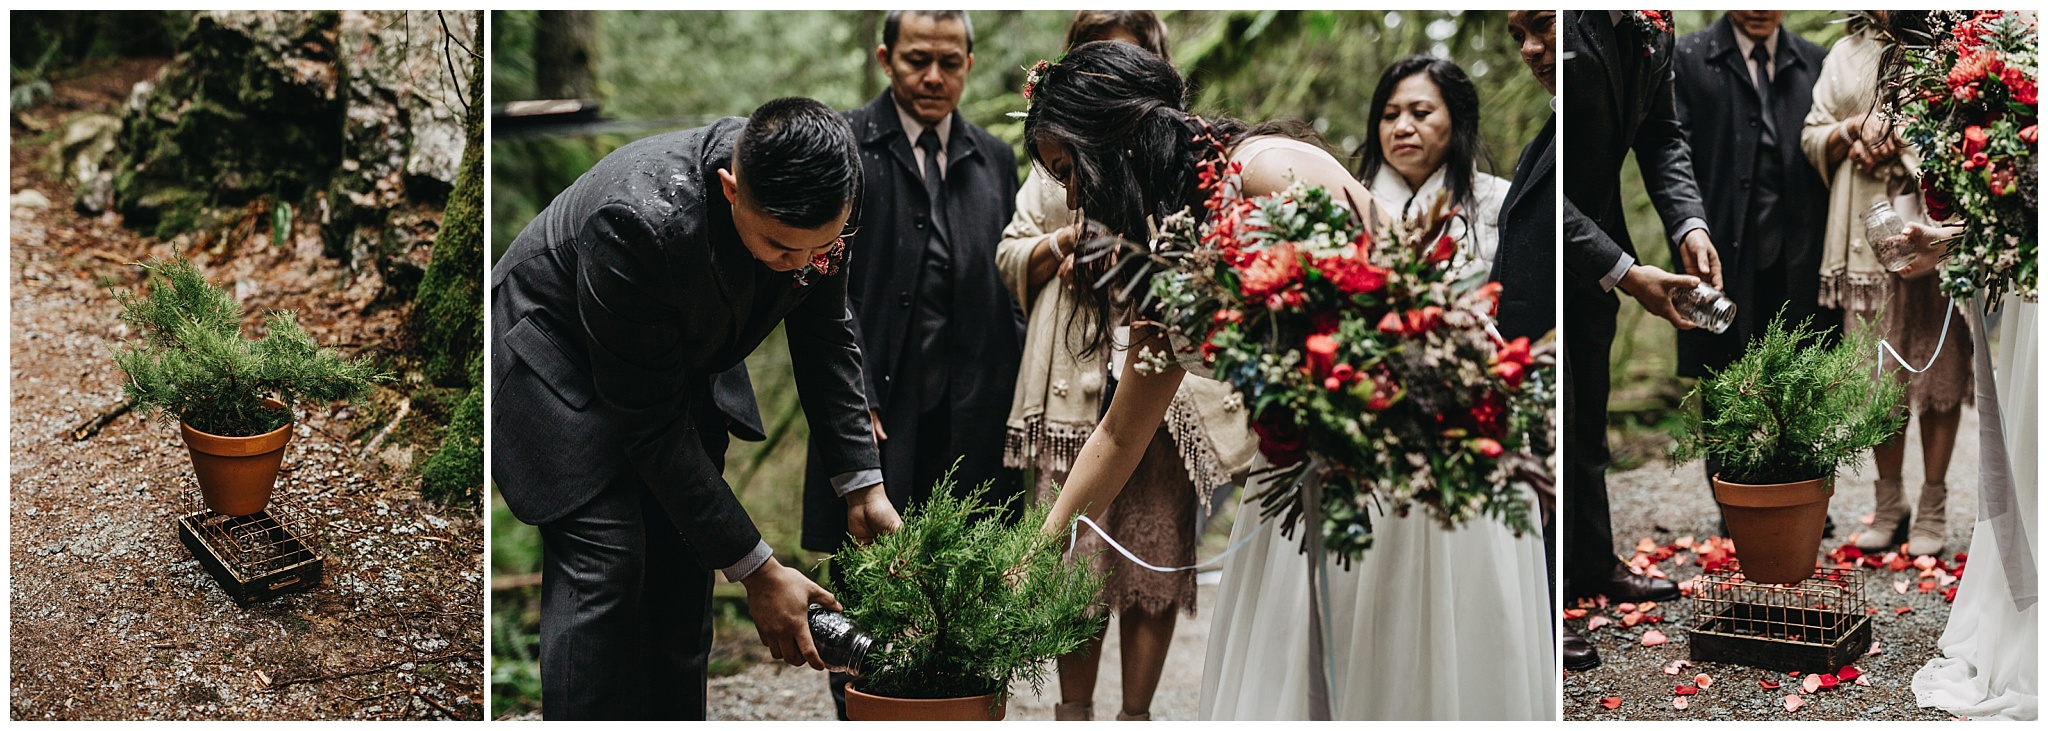 bride groom planting tree ceremony special moment golden ears park